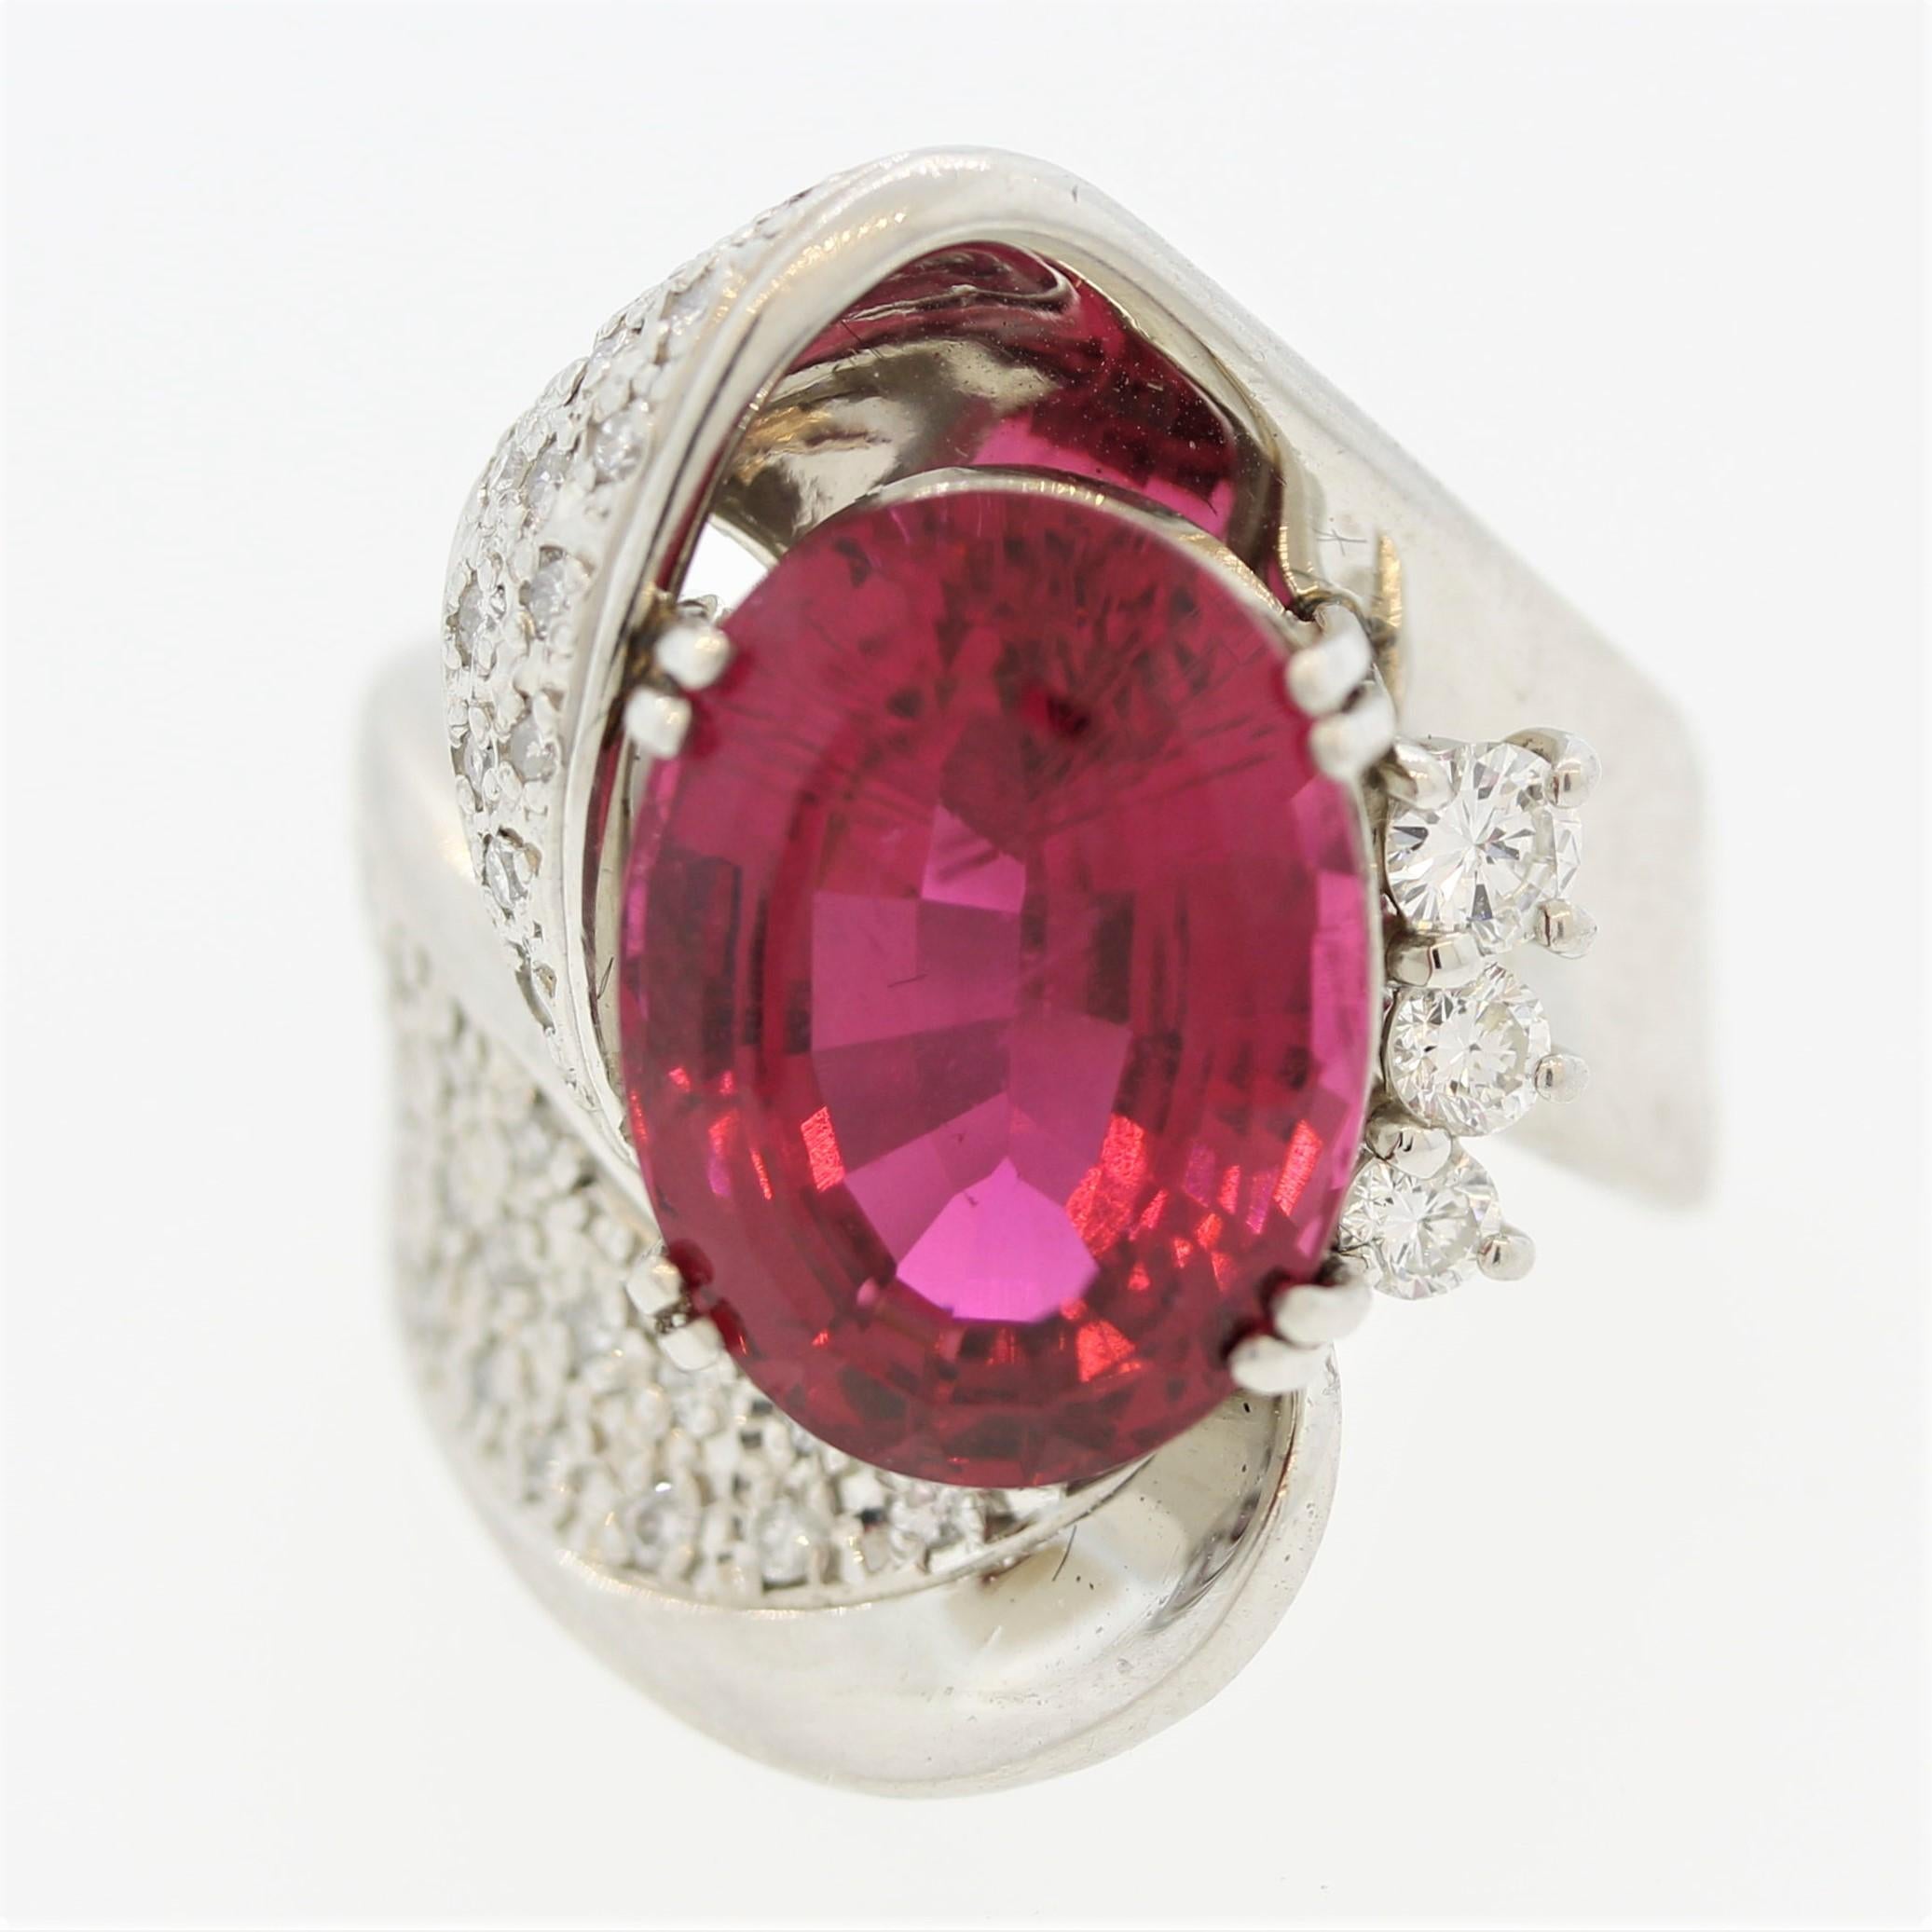 A fine tourmaline of the red rubellite variety takes center stage of this unique platinum ring. The tourmaline is cut as an oval shape and weighs an impressive 8.47 carats. It has a fine bright red color and is free of any major inclusions. It is